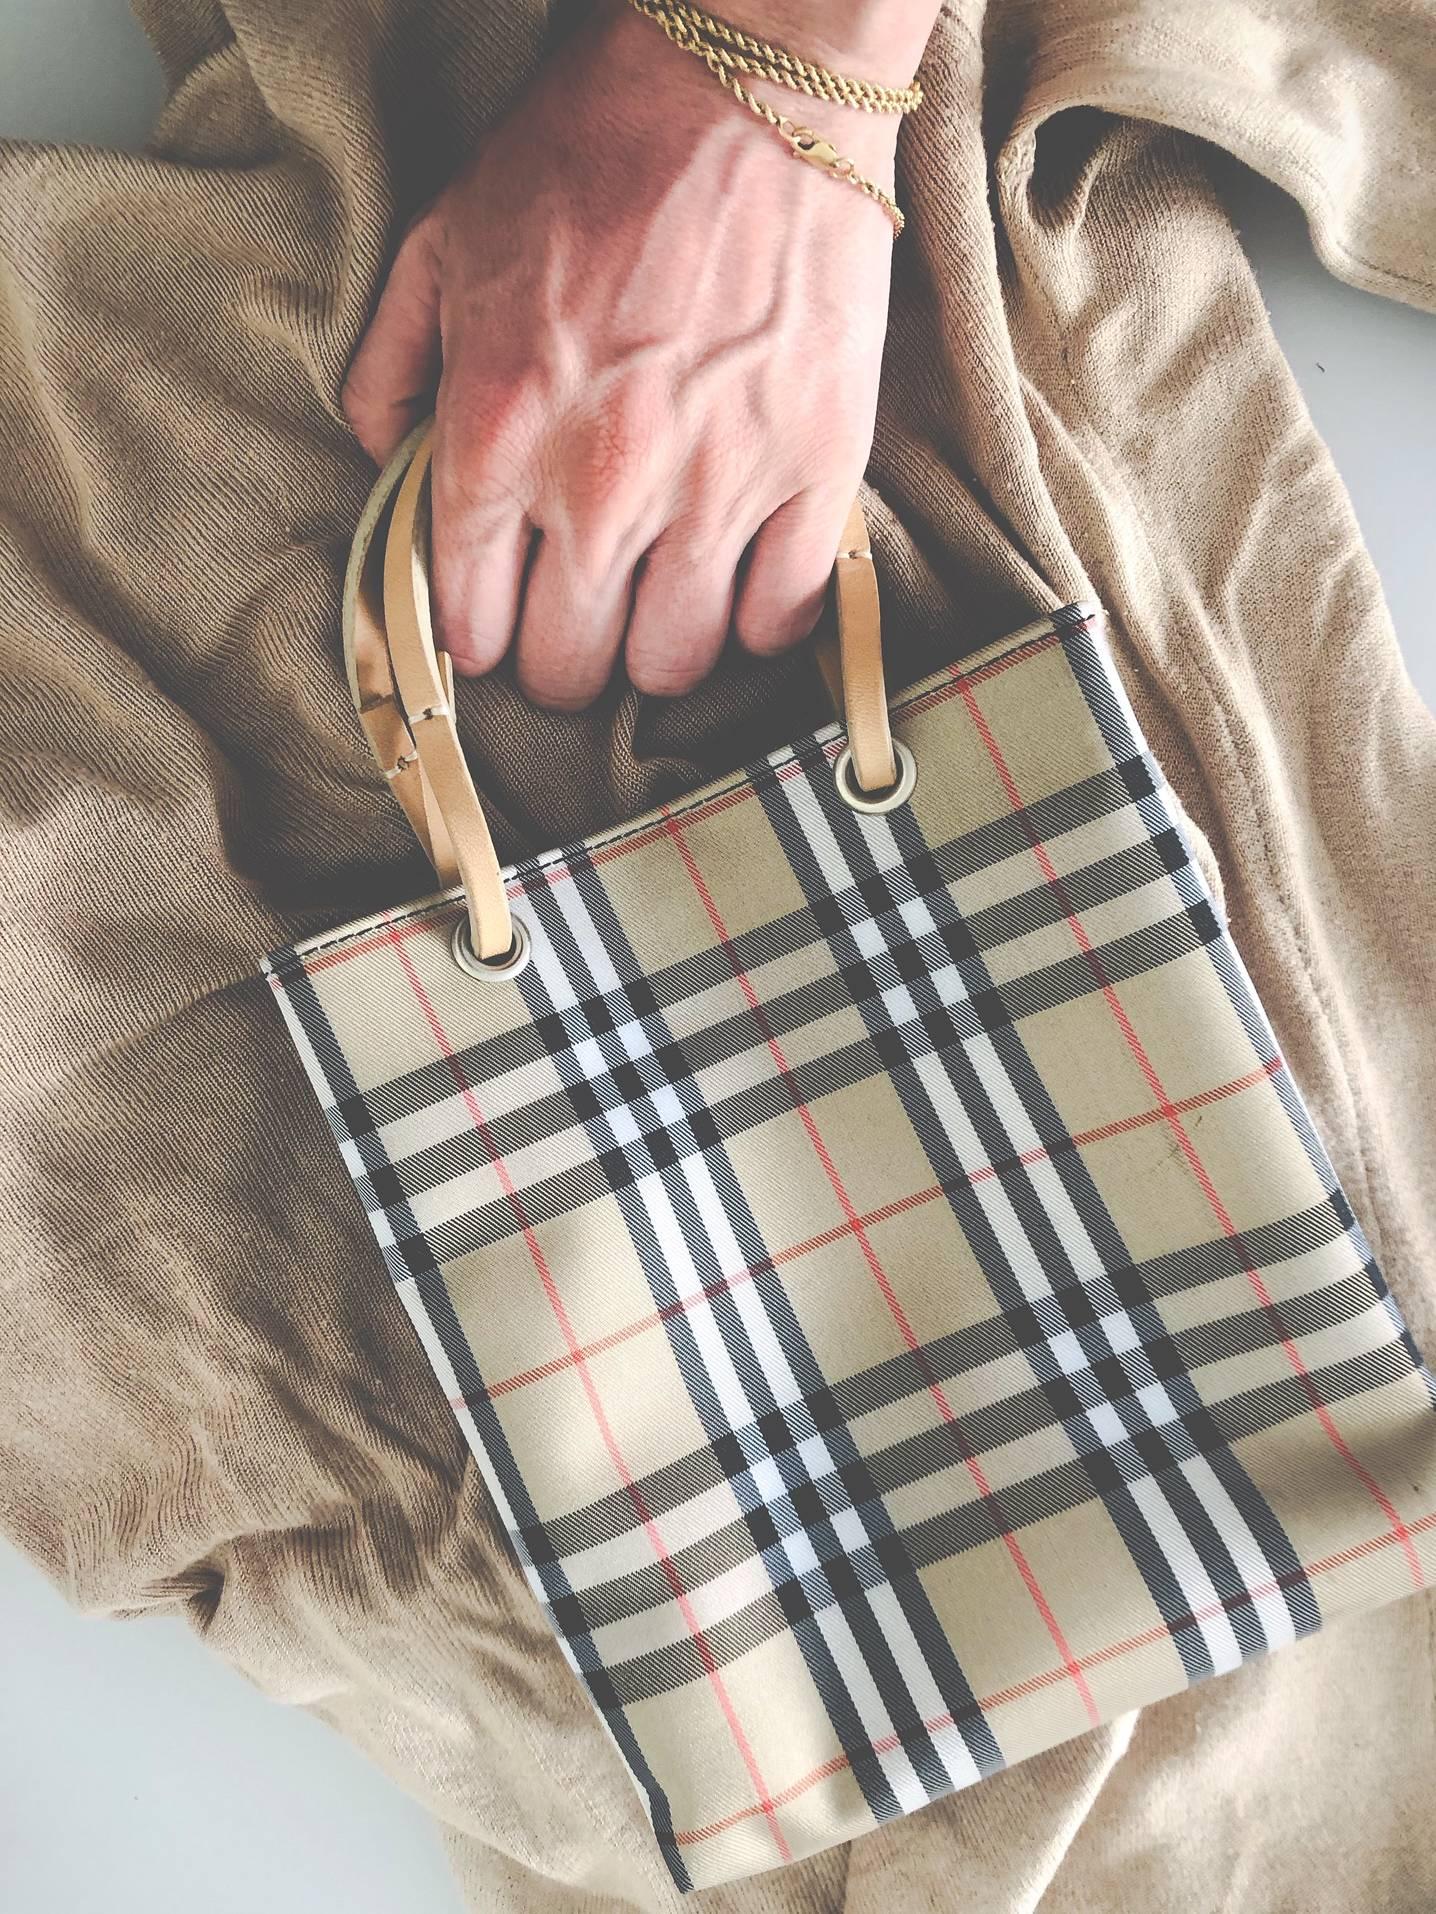 Burberry's Nova Check mini tote bag, leather handles, magnetic closure, one inside zipped pocket, canvas lining, leather, PVC, Made in Italy

Condition: 2000s, vintage. excellent, new
Dimensions: 21cm x 18cm x 9cm